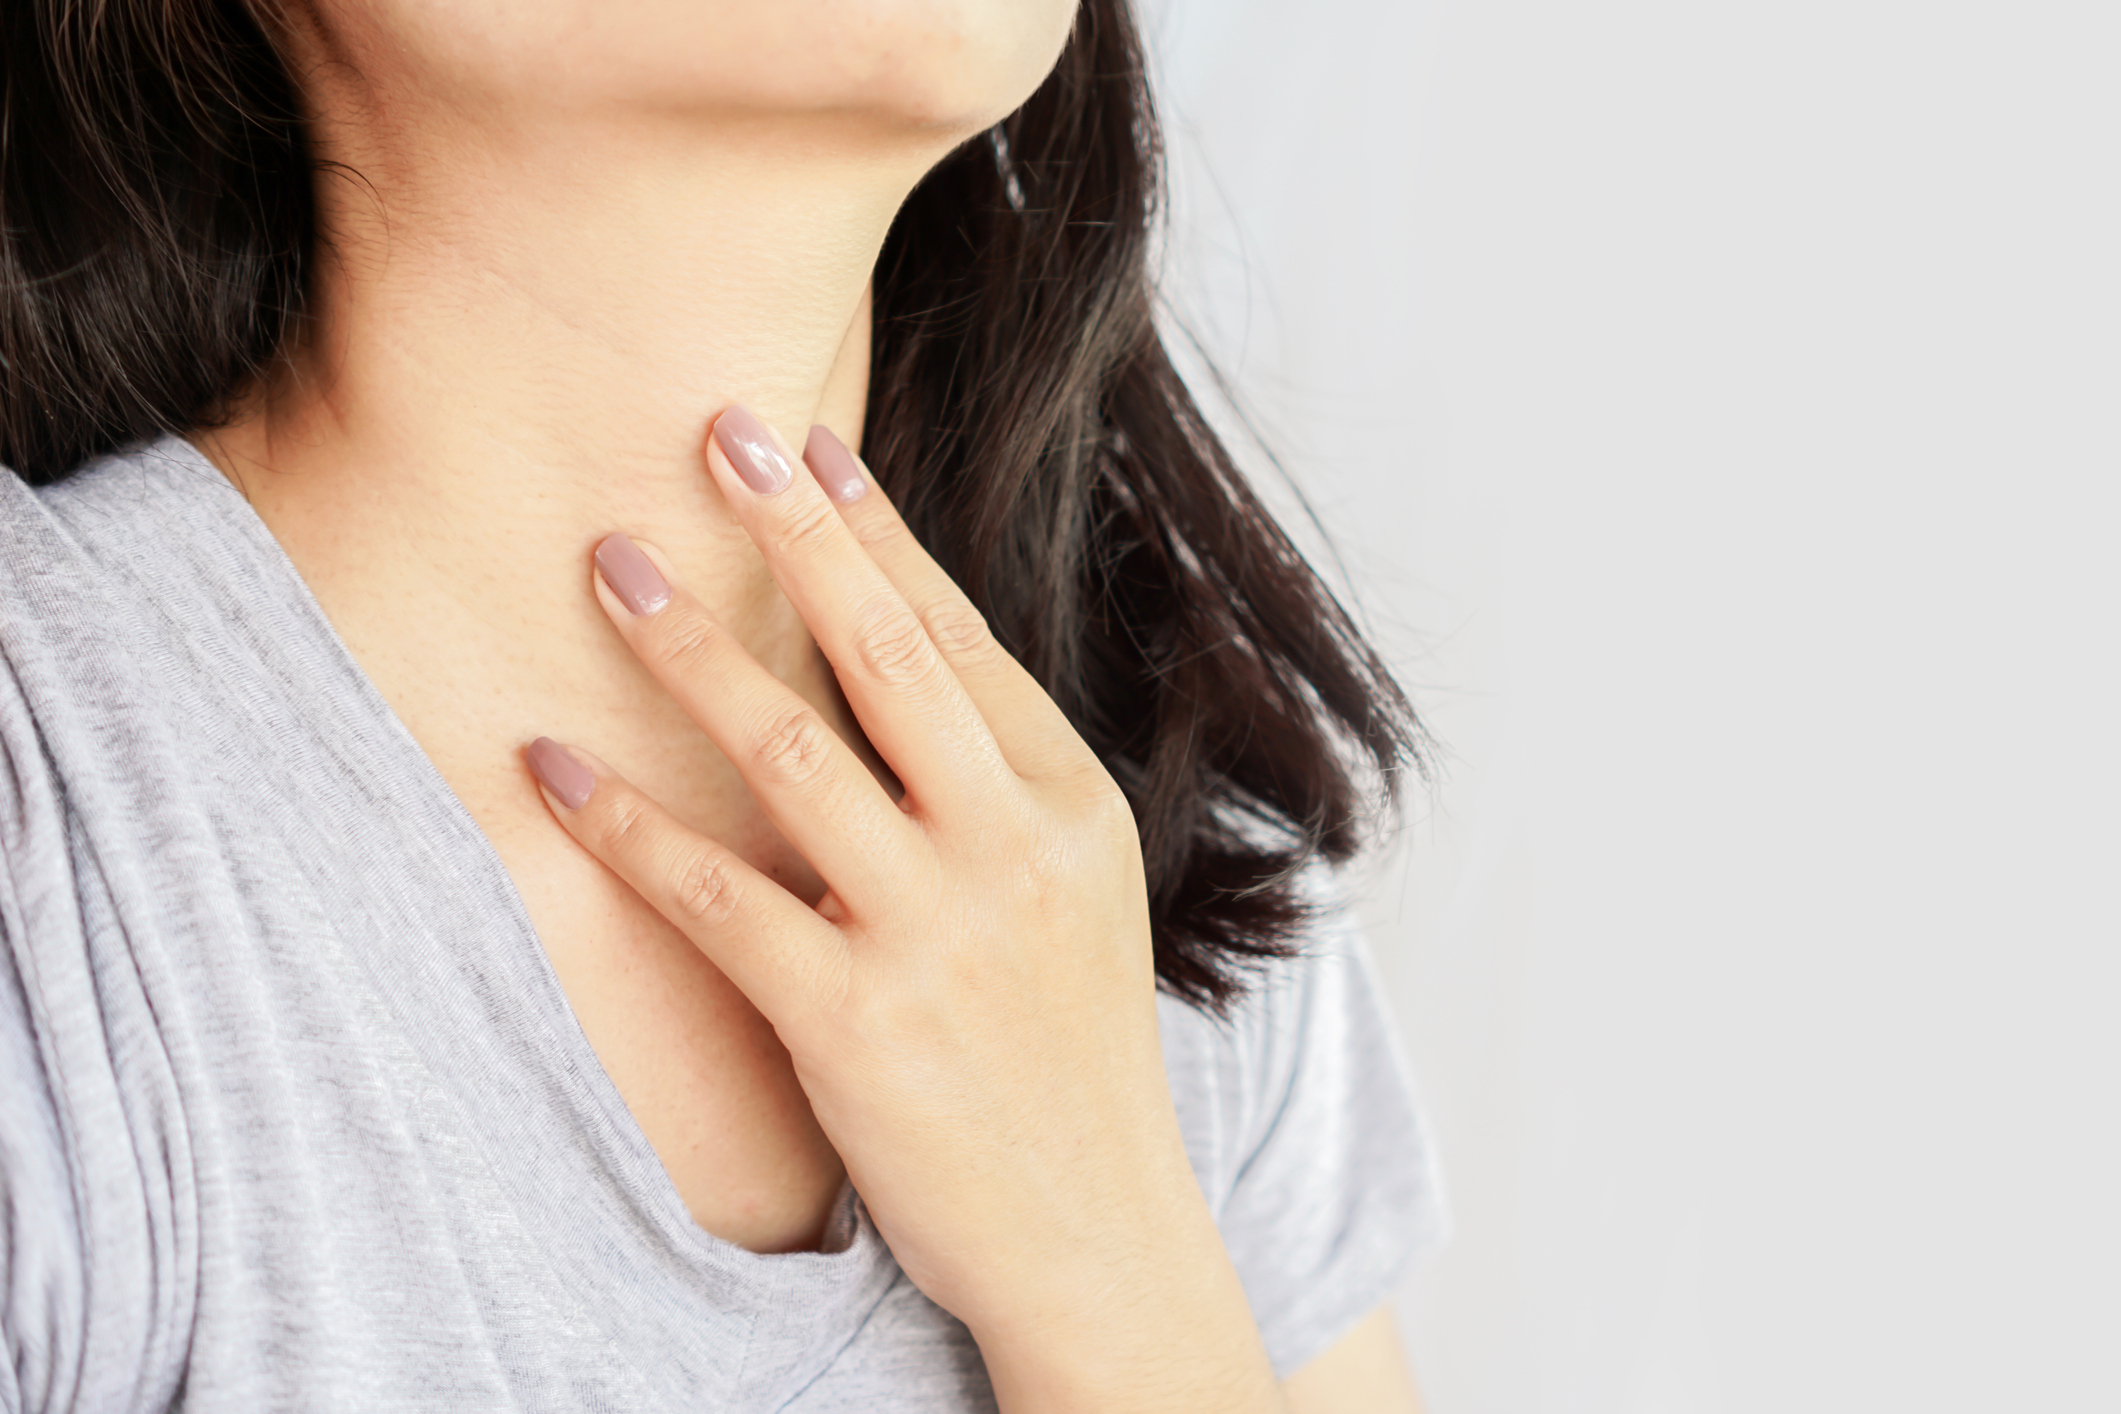 When should you worry about a swollen lymph node?